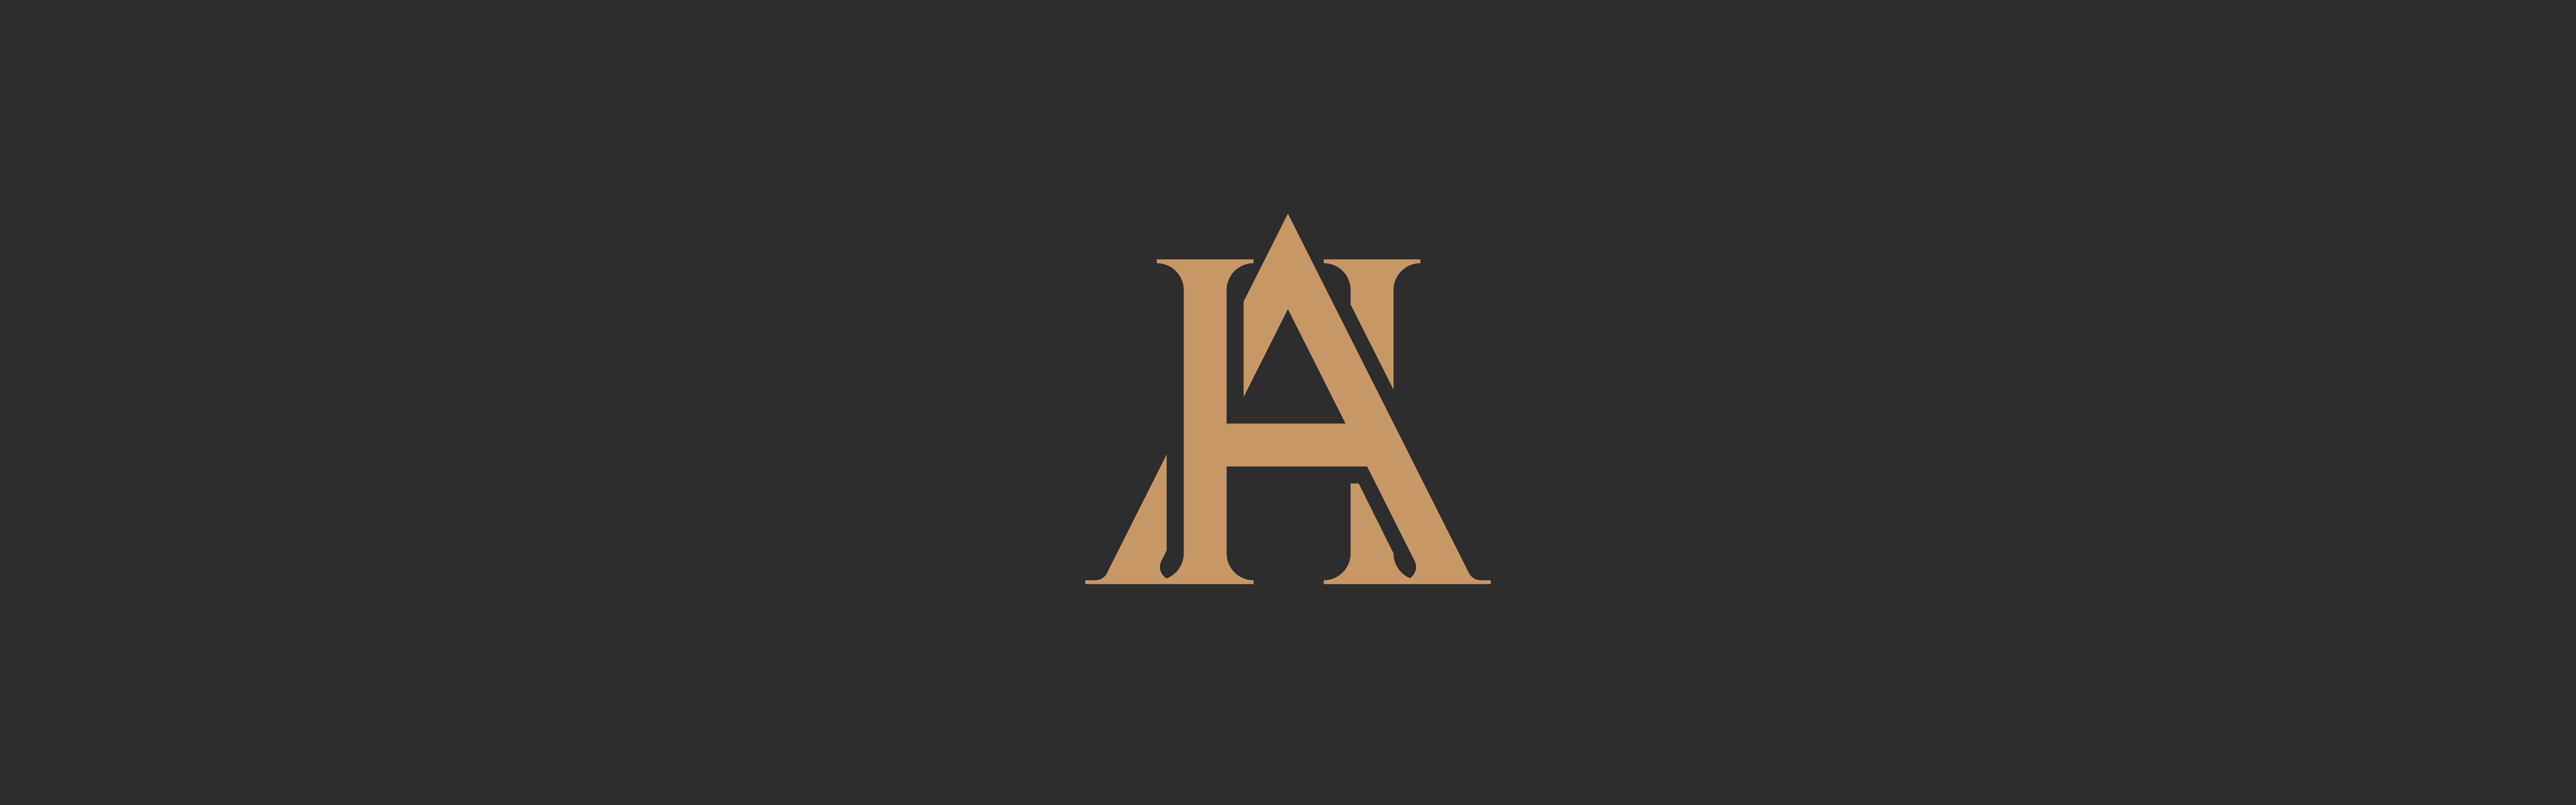 Gold letter "a" in a serif font centered on a black background, symbolizing Hotel Americano.